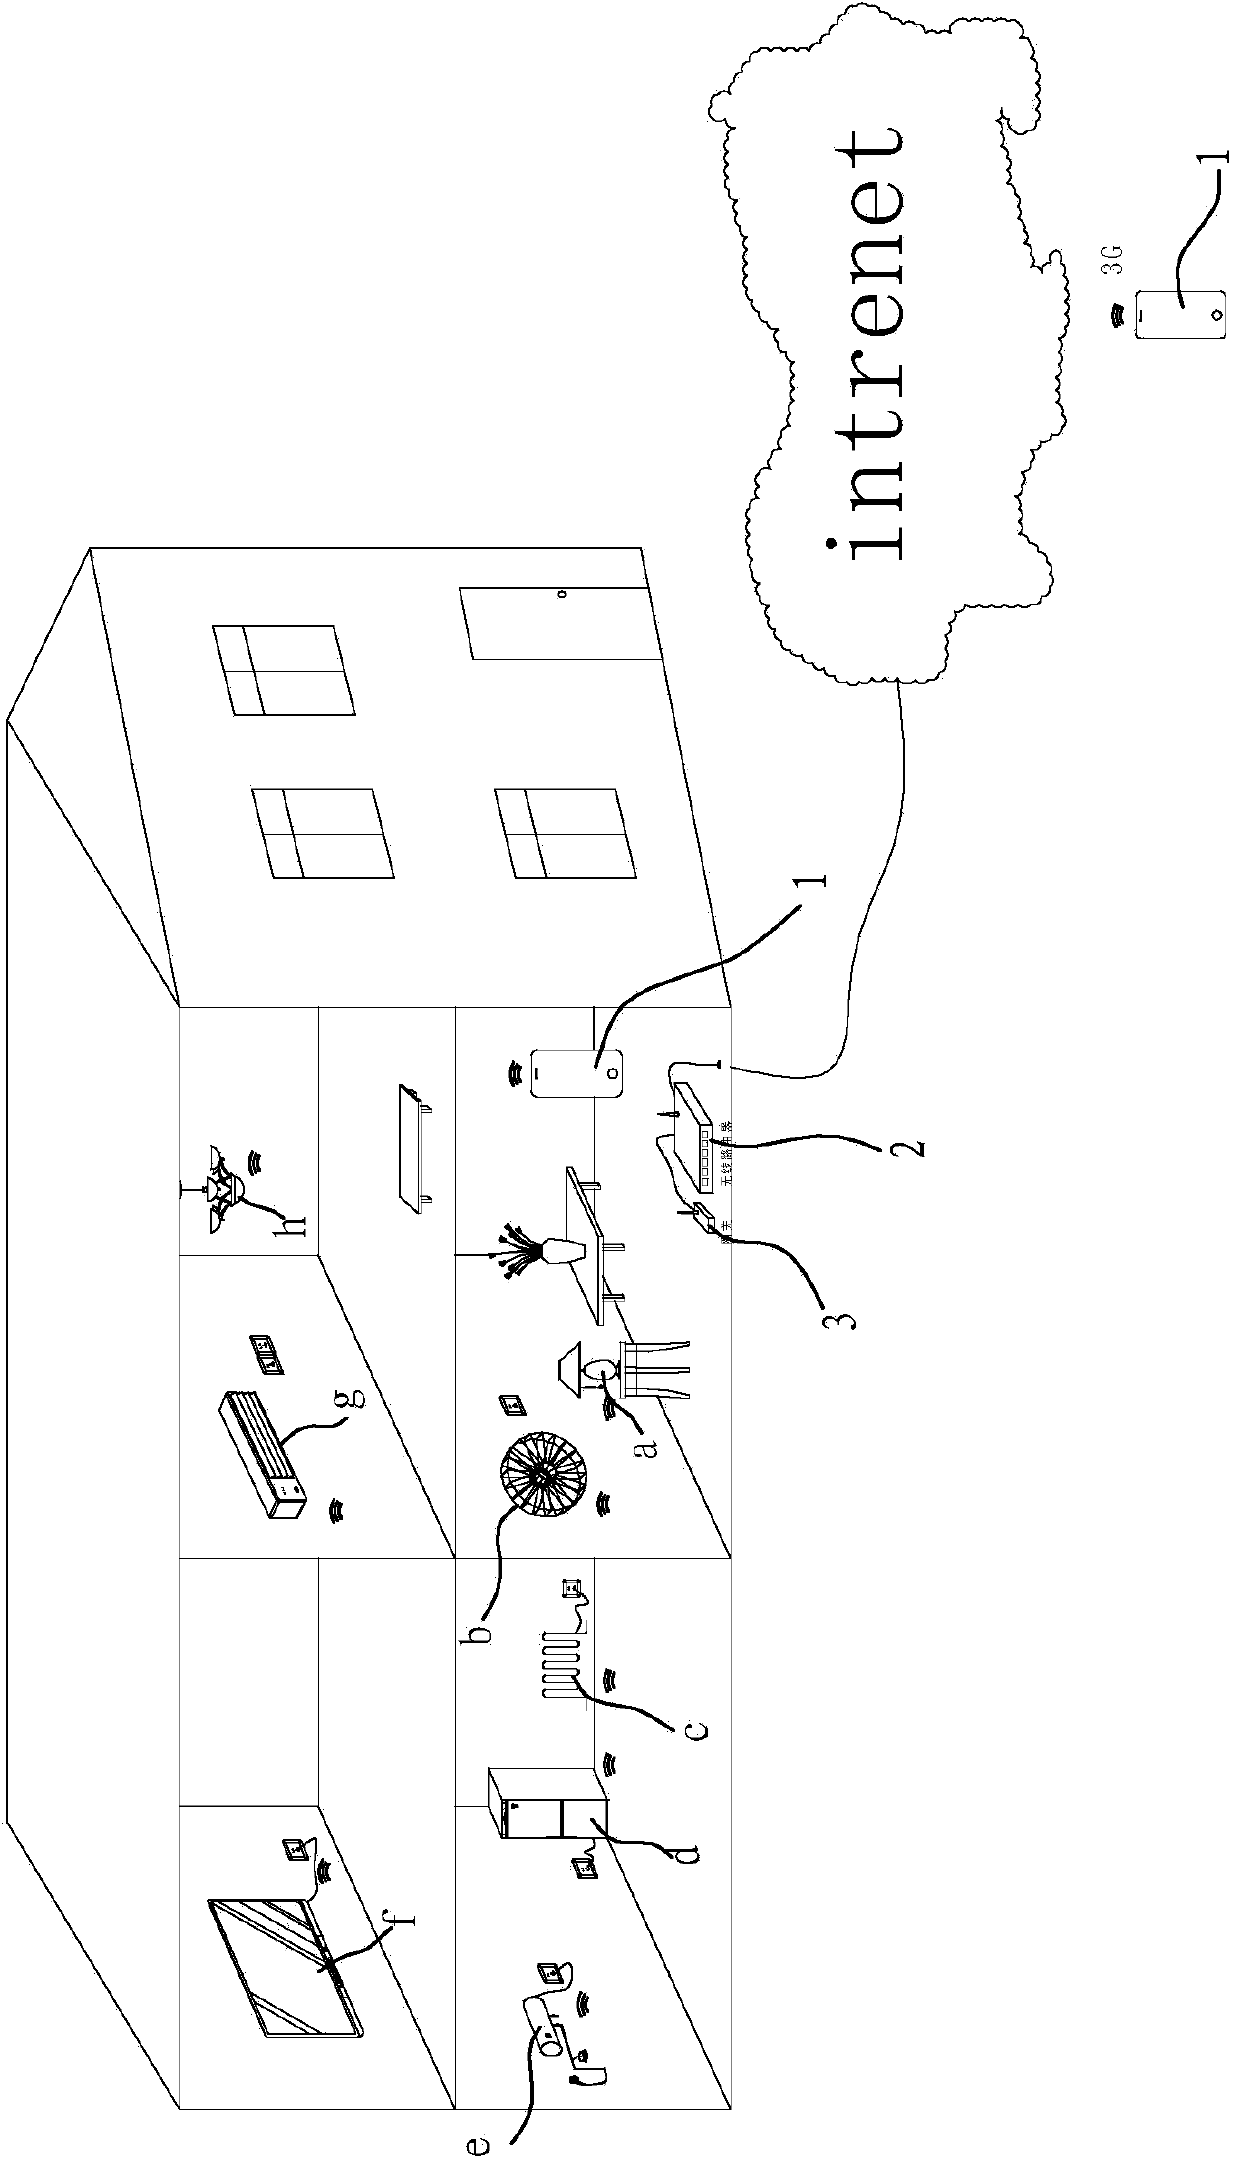 Intelligent home control system and method